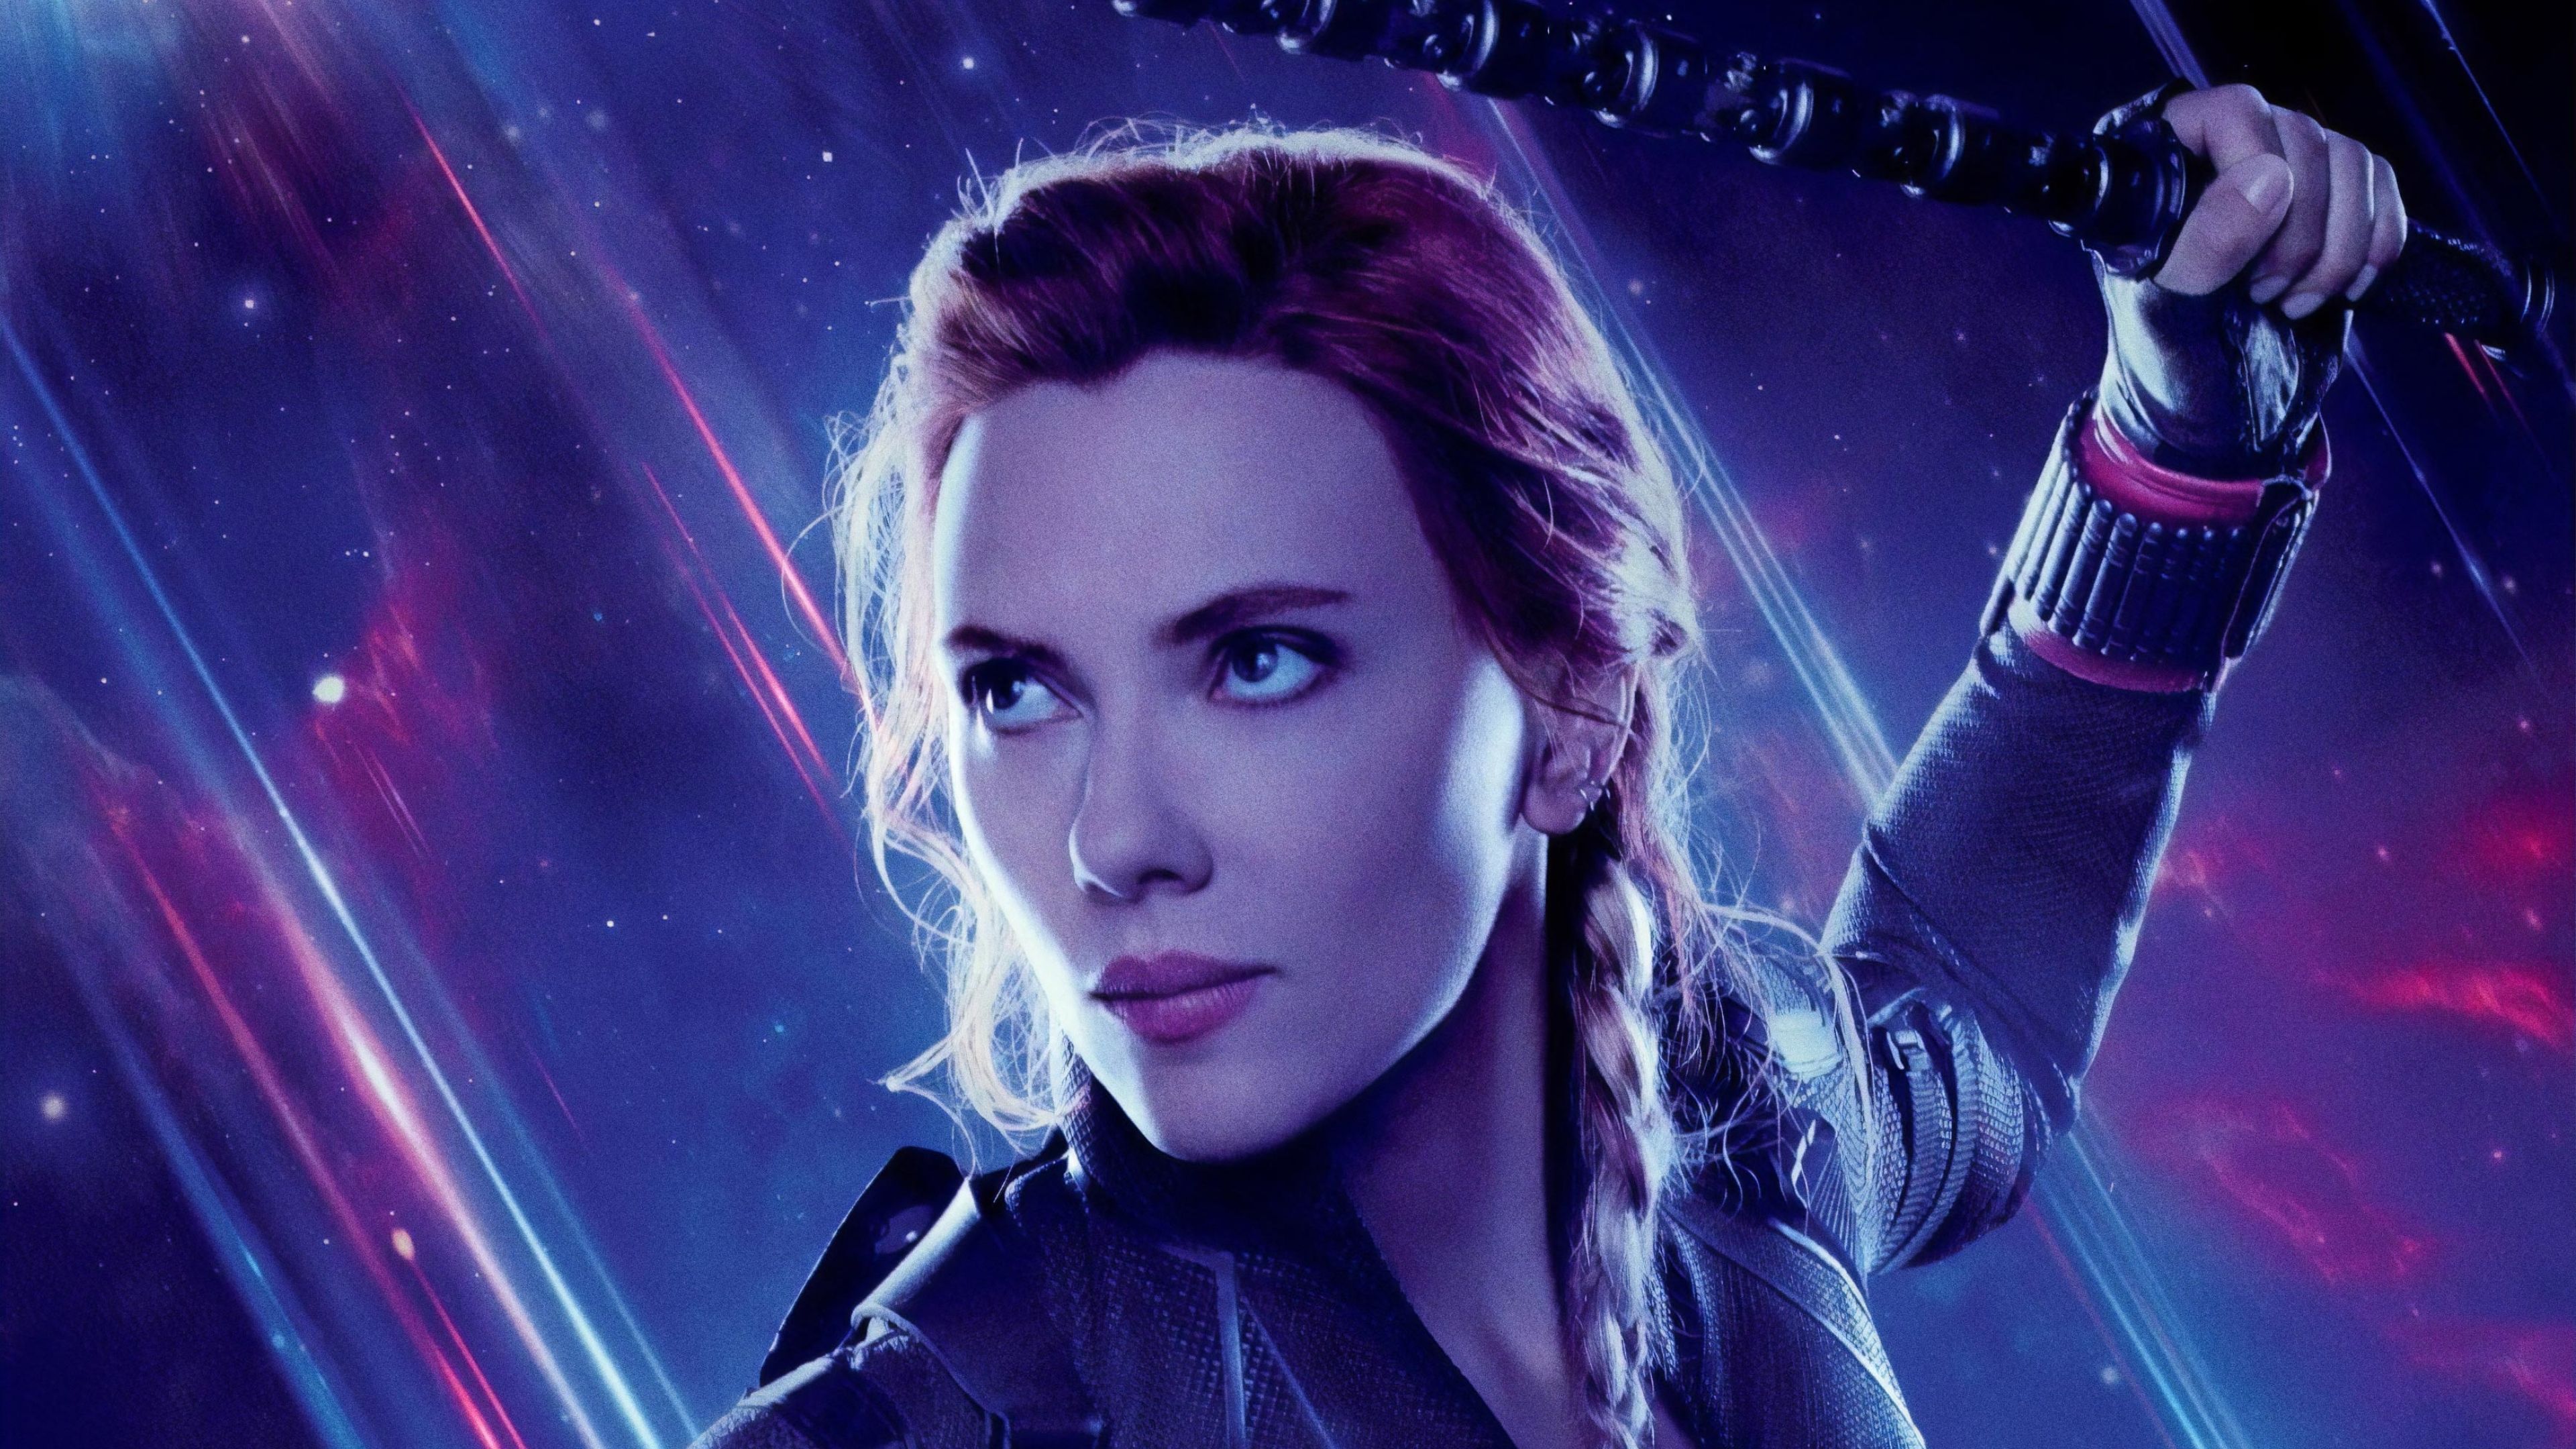 Black Widow Avengers Endgame Official Poster Wallpapers